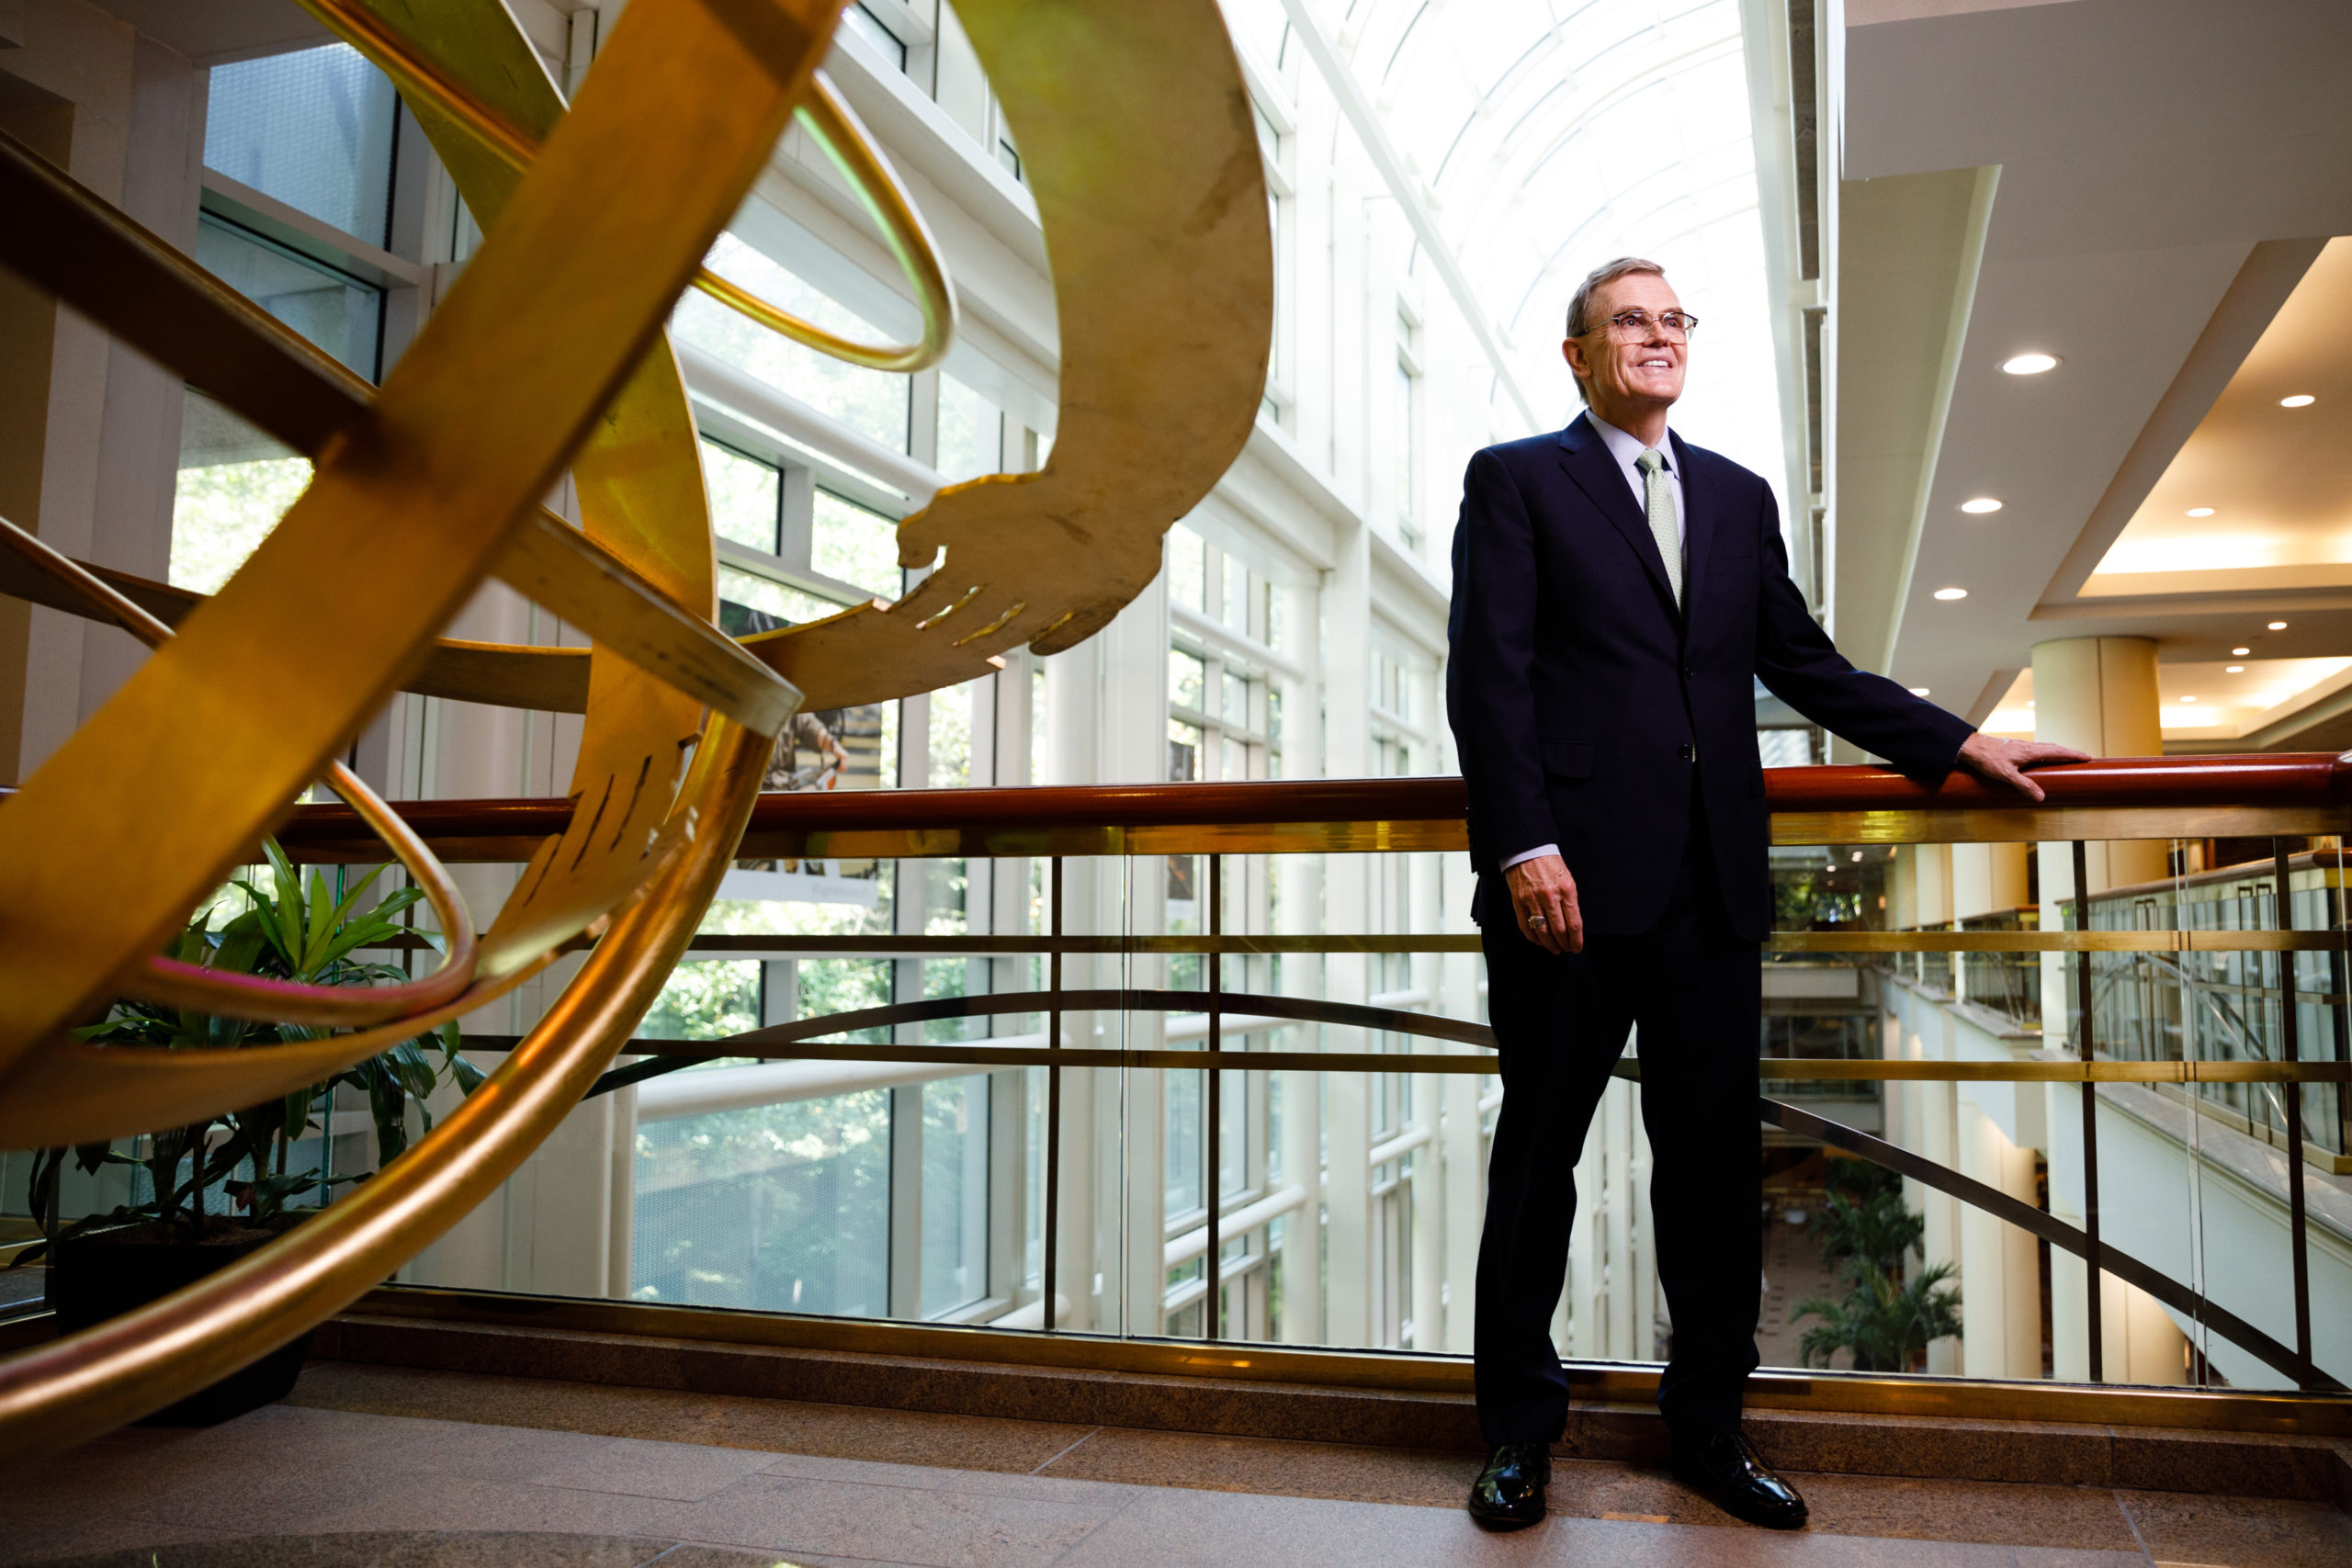 David Abney, chief executive officer and chairman of the United Parcel Service Inc. (UPS), stands for a photograph at the company's headquarters in Sandy Springs, Georgia, U.S., on Thursday, Sept. 12, 2019. A little more than two years into his tenure as CEO, Abney first broached to investors what has become the company's most sweeping top-to-bottom overhaul in decades. Photographer: Dustin Chambers/Bloomberg